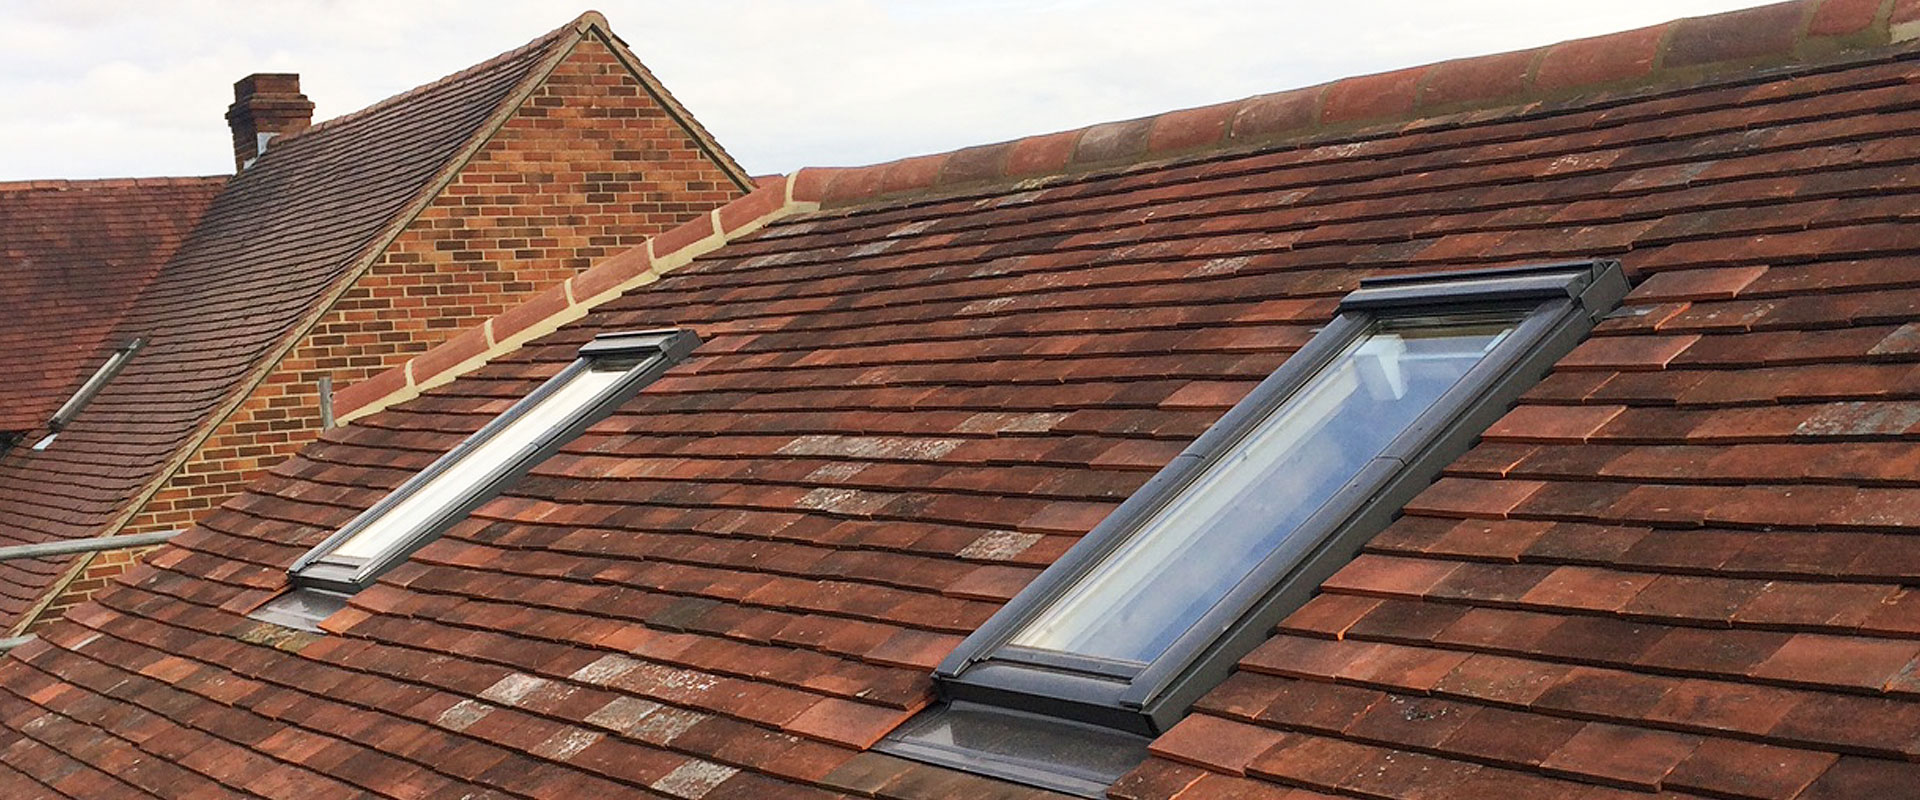 Willow Roofing Tiled Roof with Roof Light